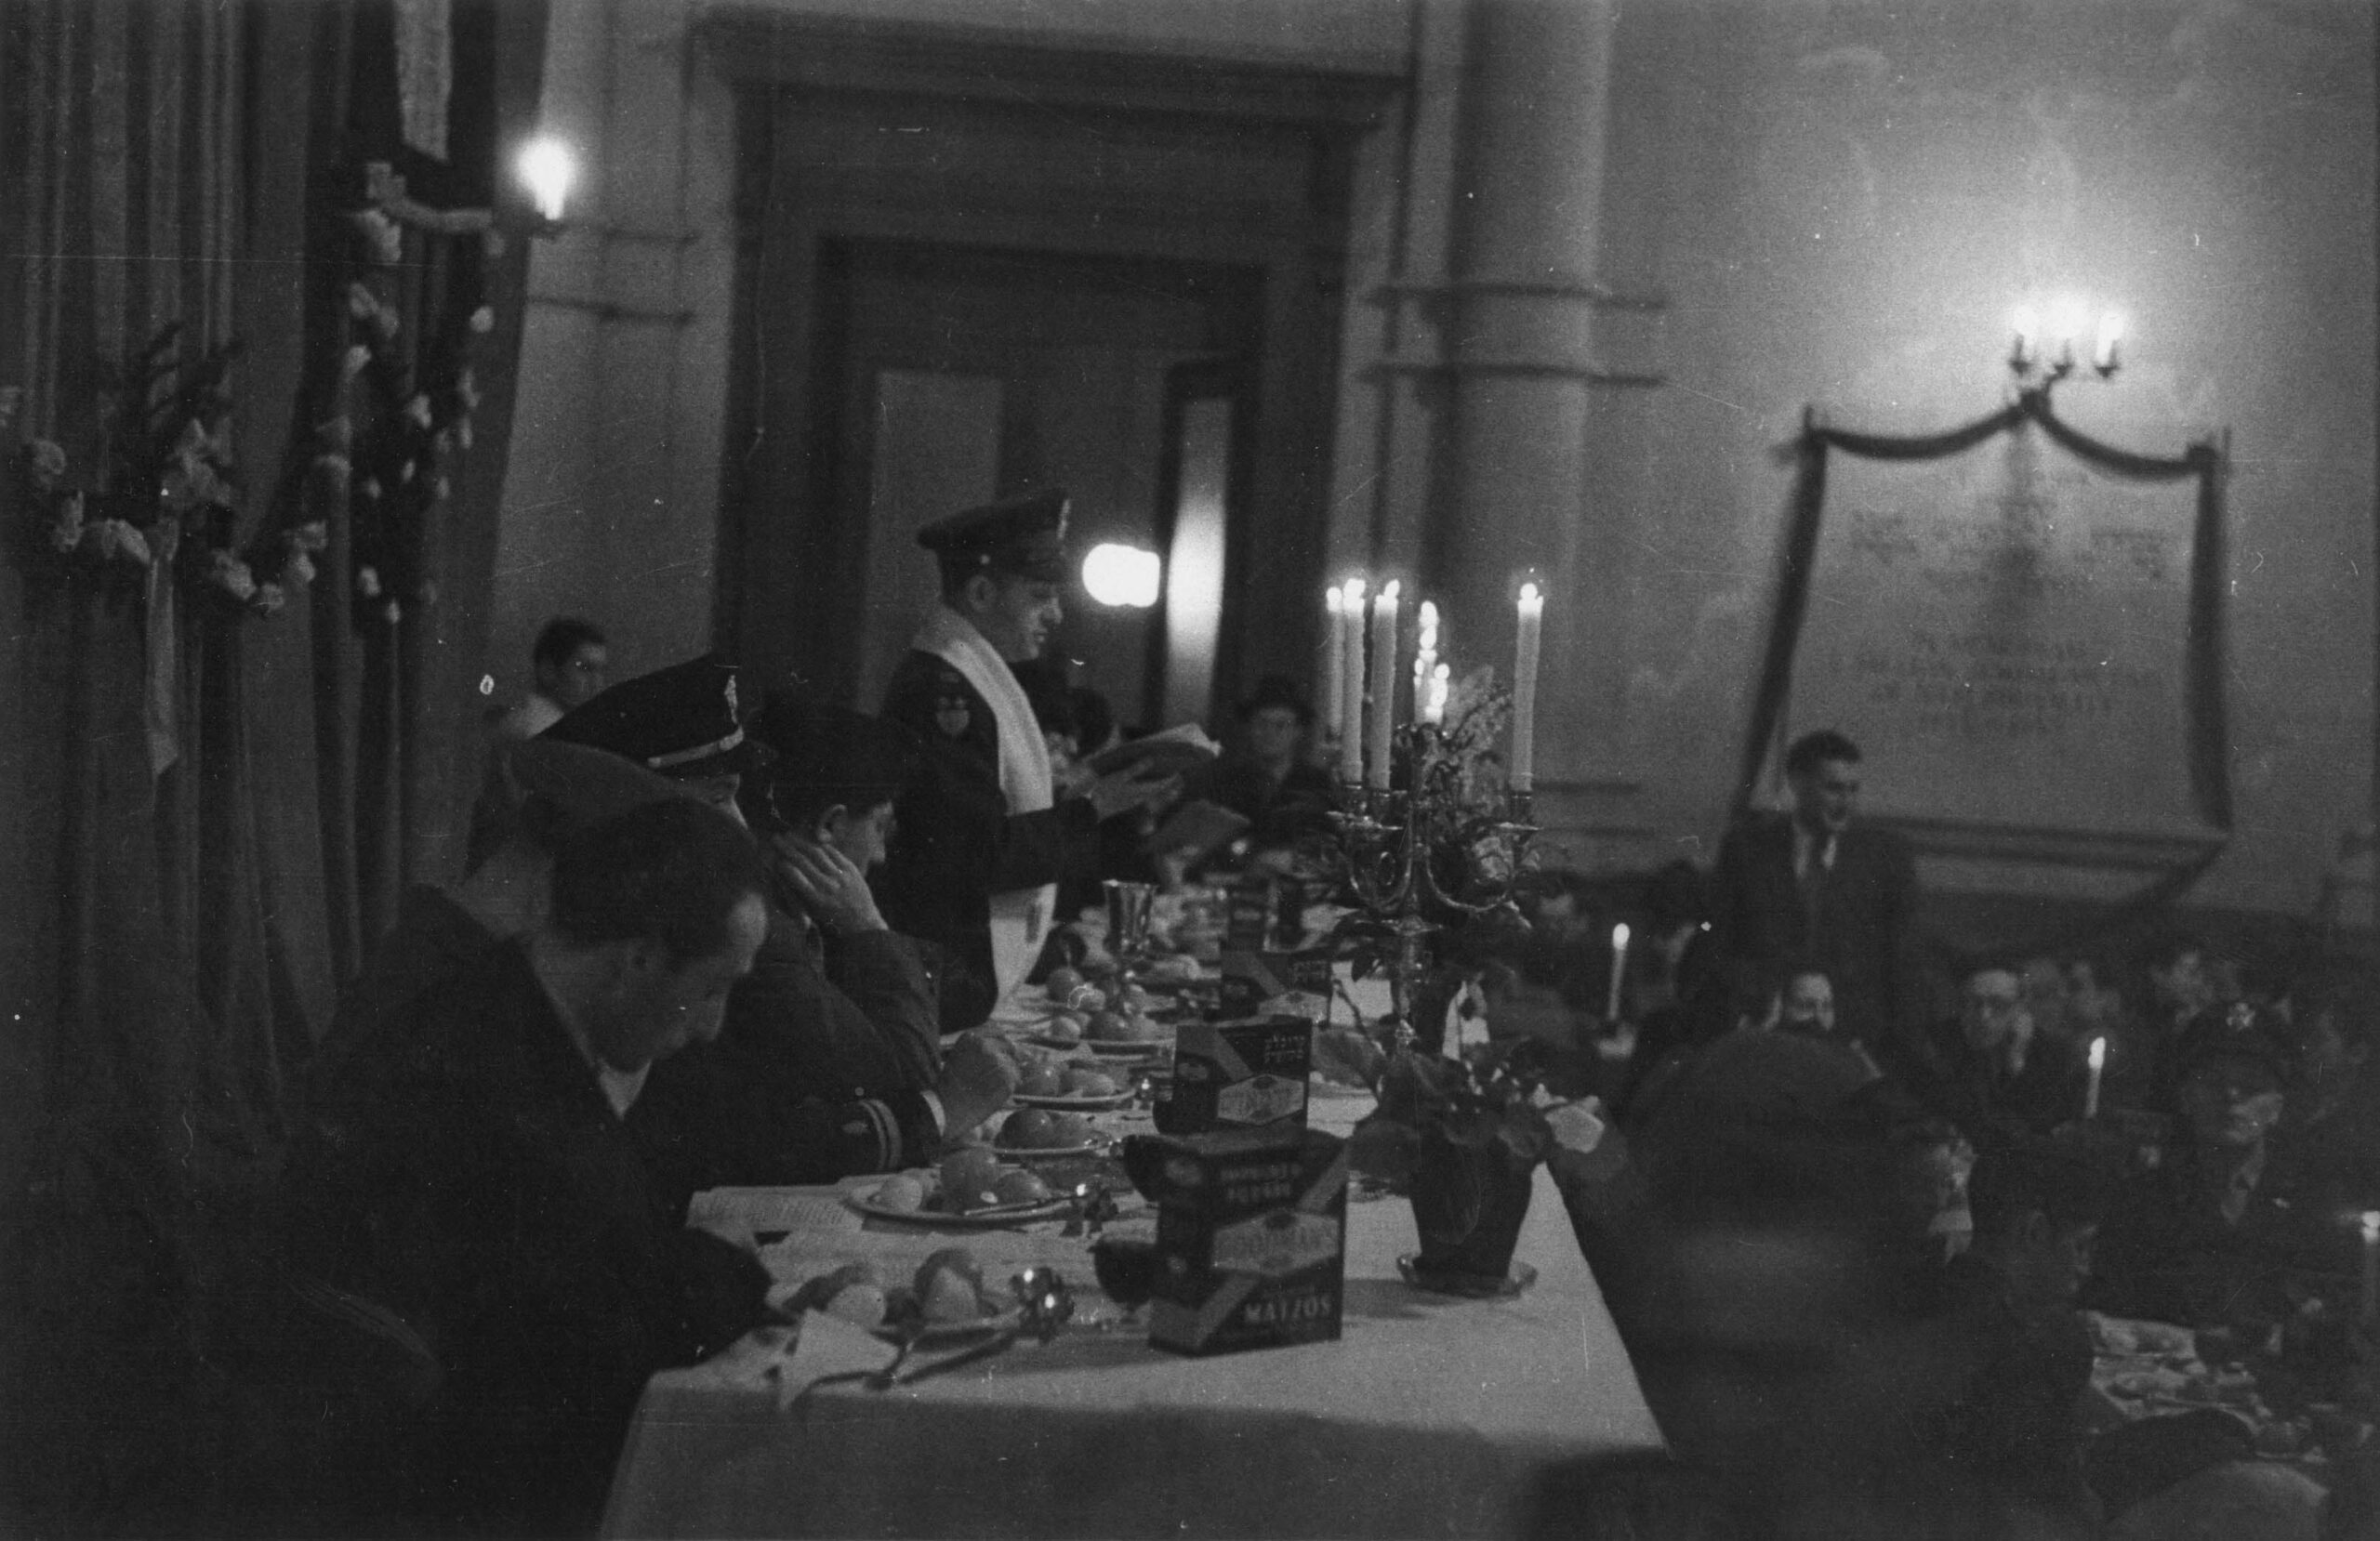 Passover 1947 in the synagogue. Collection Jewish Community Wiesbaden